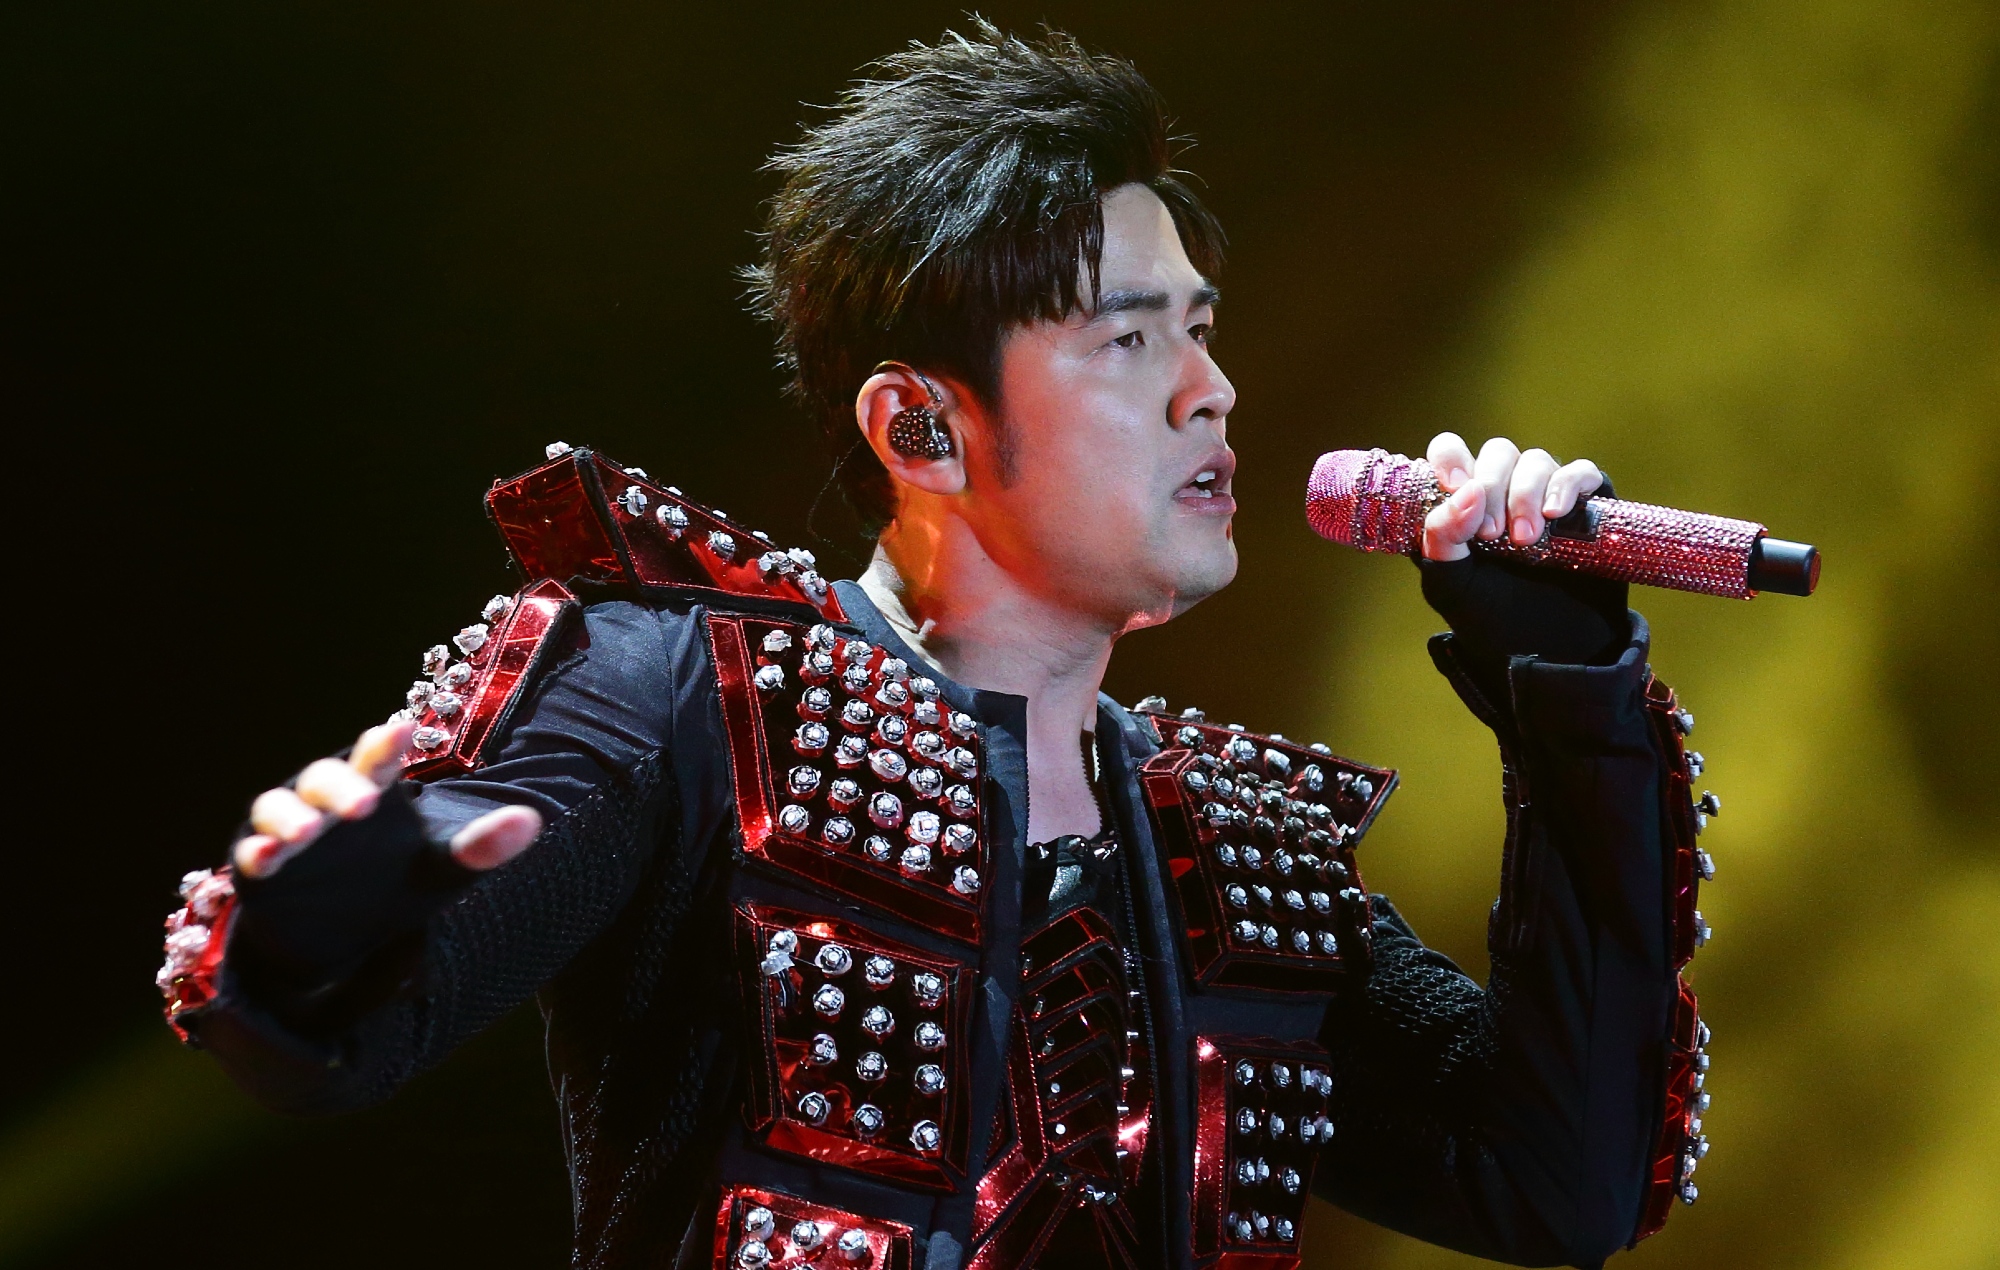 Jay Chou is slated to perform in Malaysia next January, with tickets going on sale on 1st June 2022. Image credit: Getty Images via NME